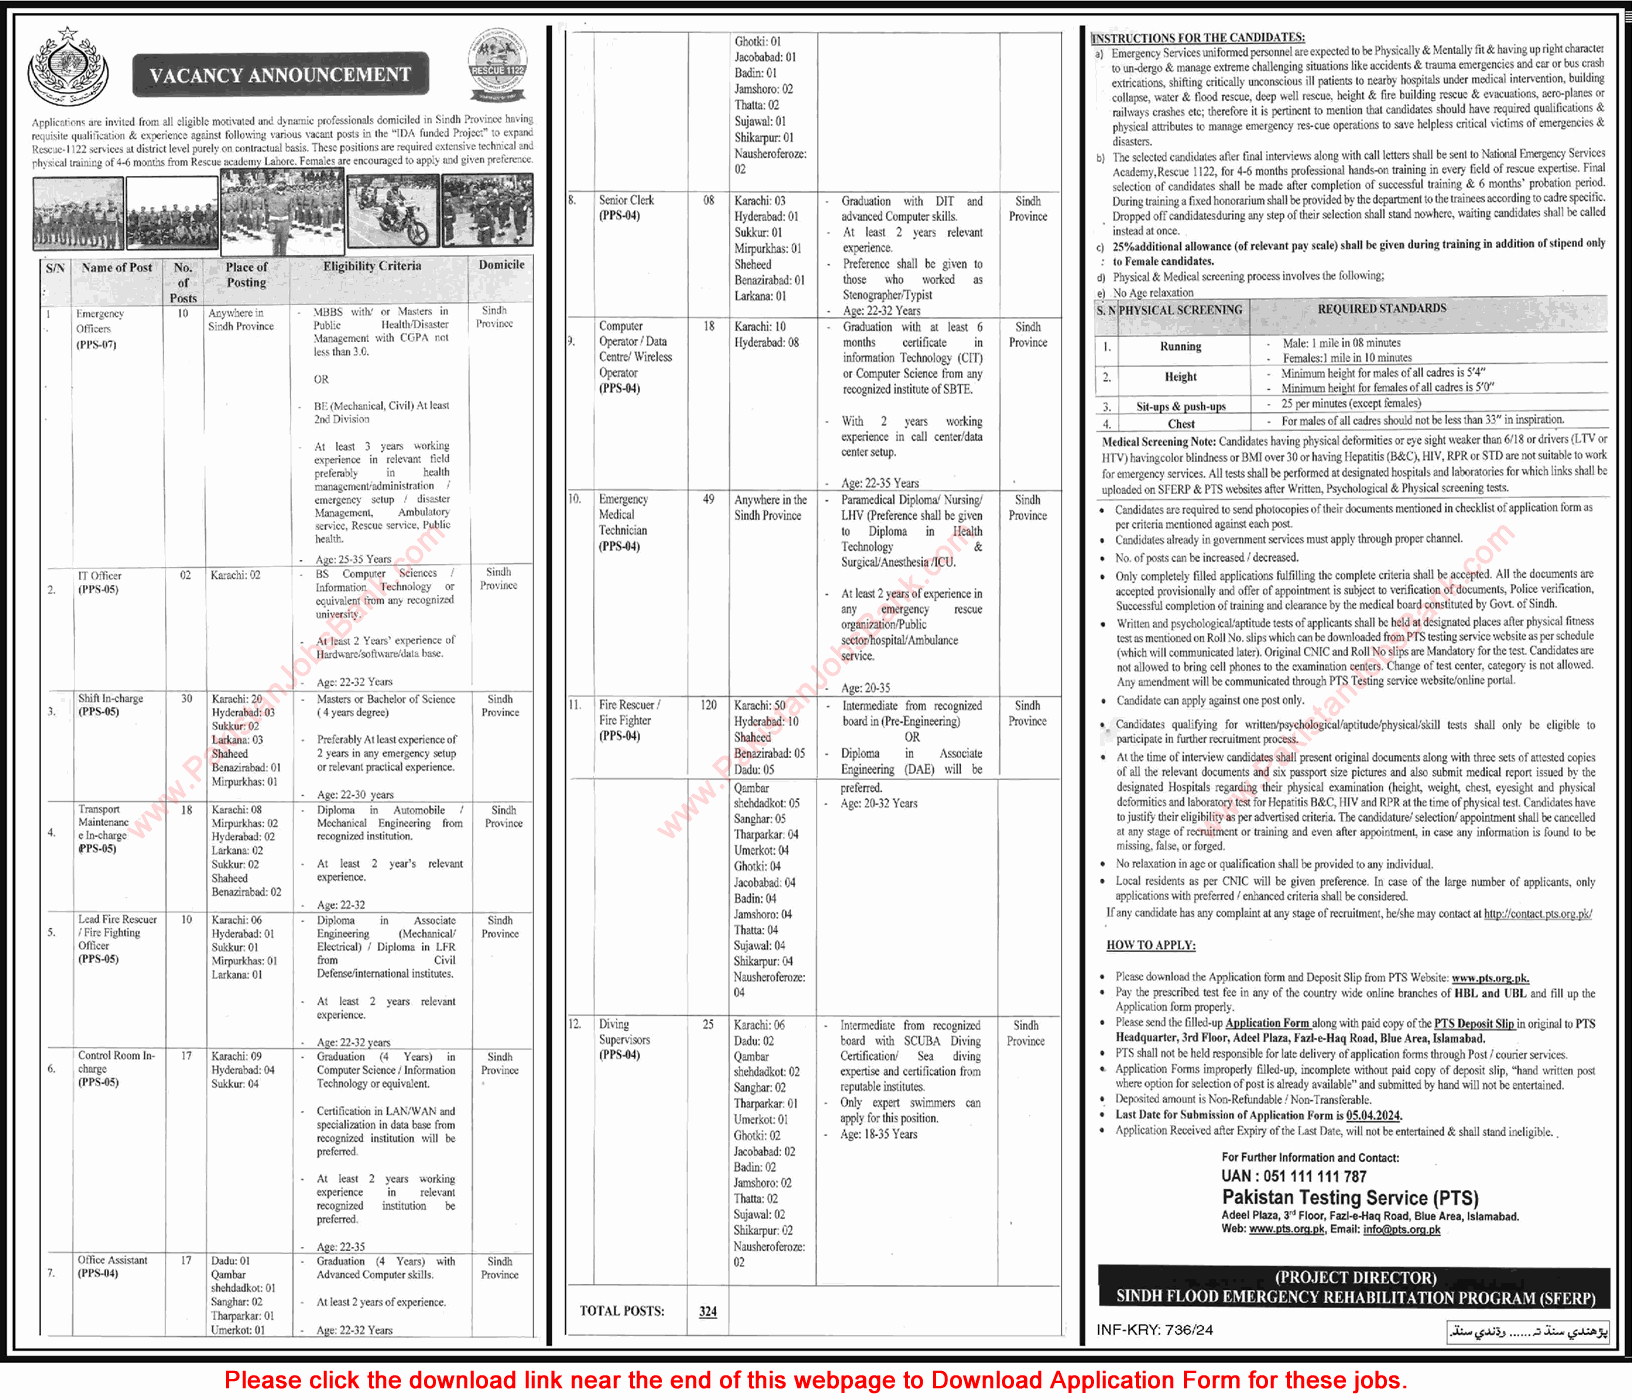 Sindh Emergency Rescue Service 1122 Jobs 2024 March PTS Application Form Fire Rescuers / Fighters & Others Latest